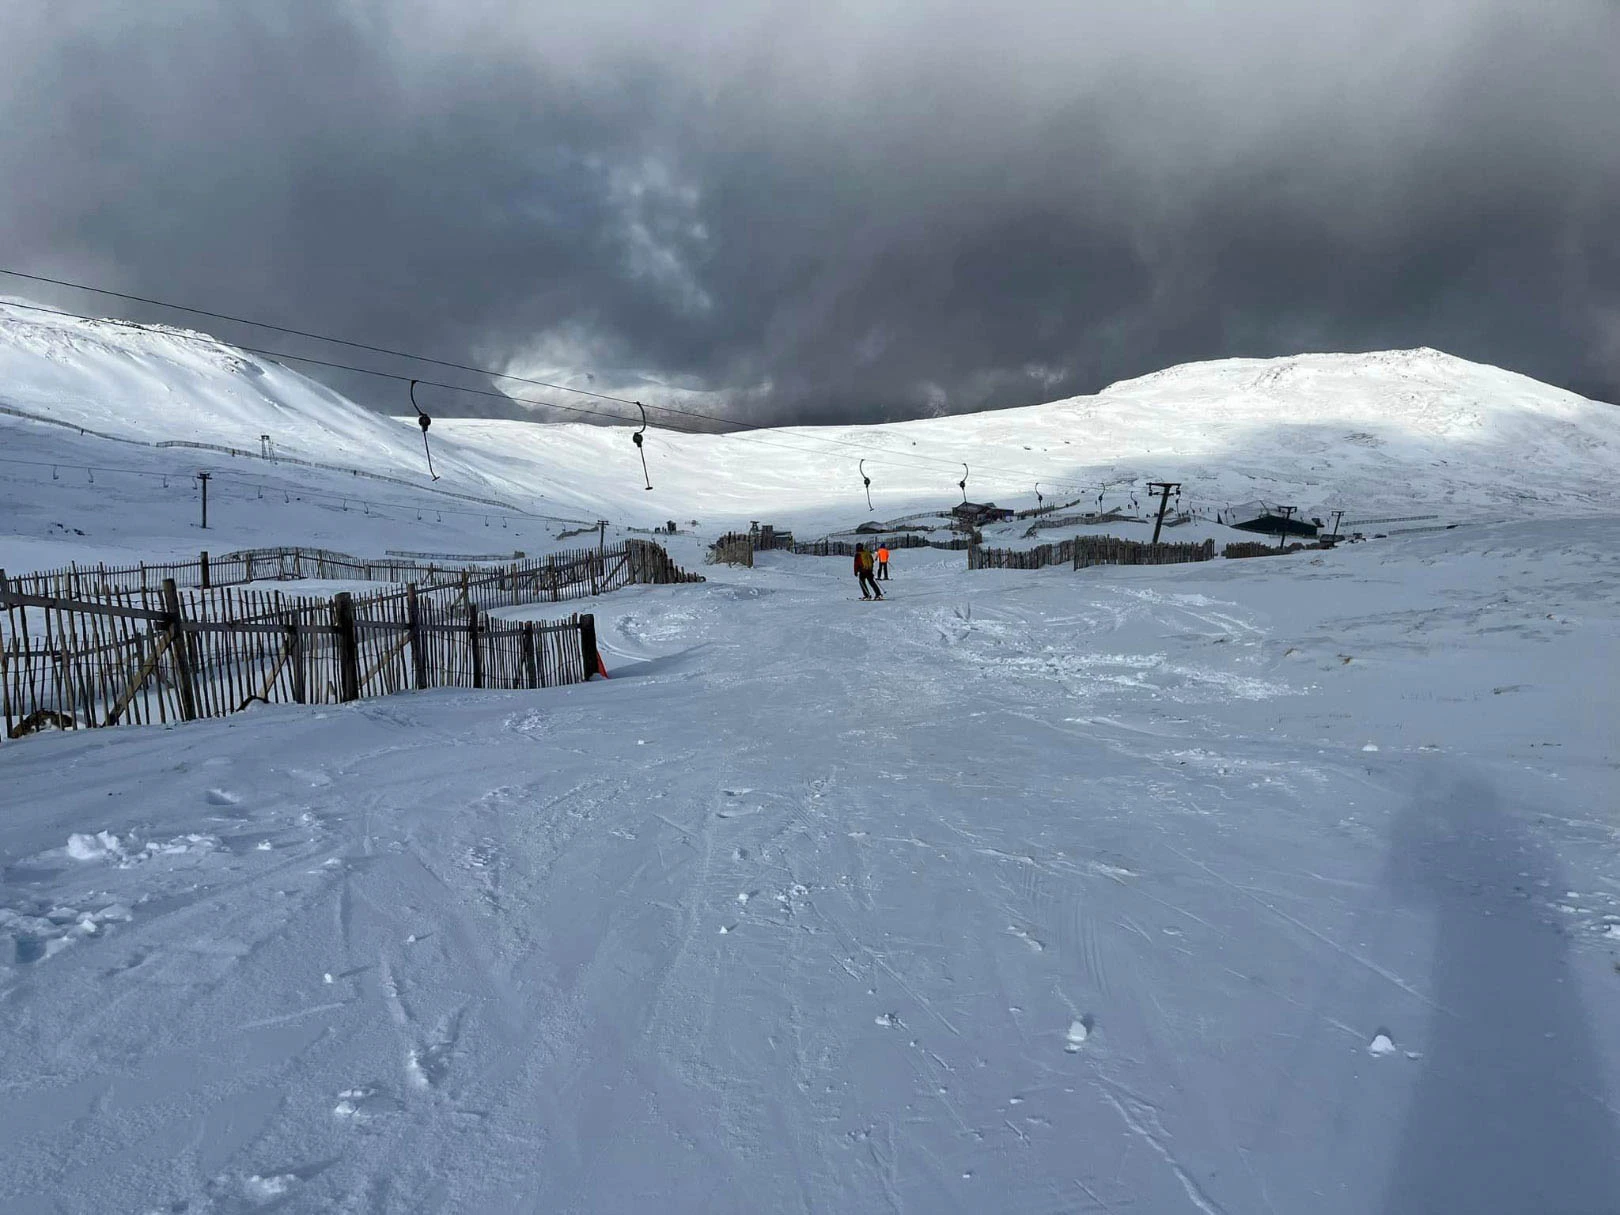 A Scottish ski hill with snow fences surround a thin piste on a grey day, with two skiers skiing